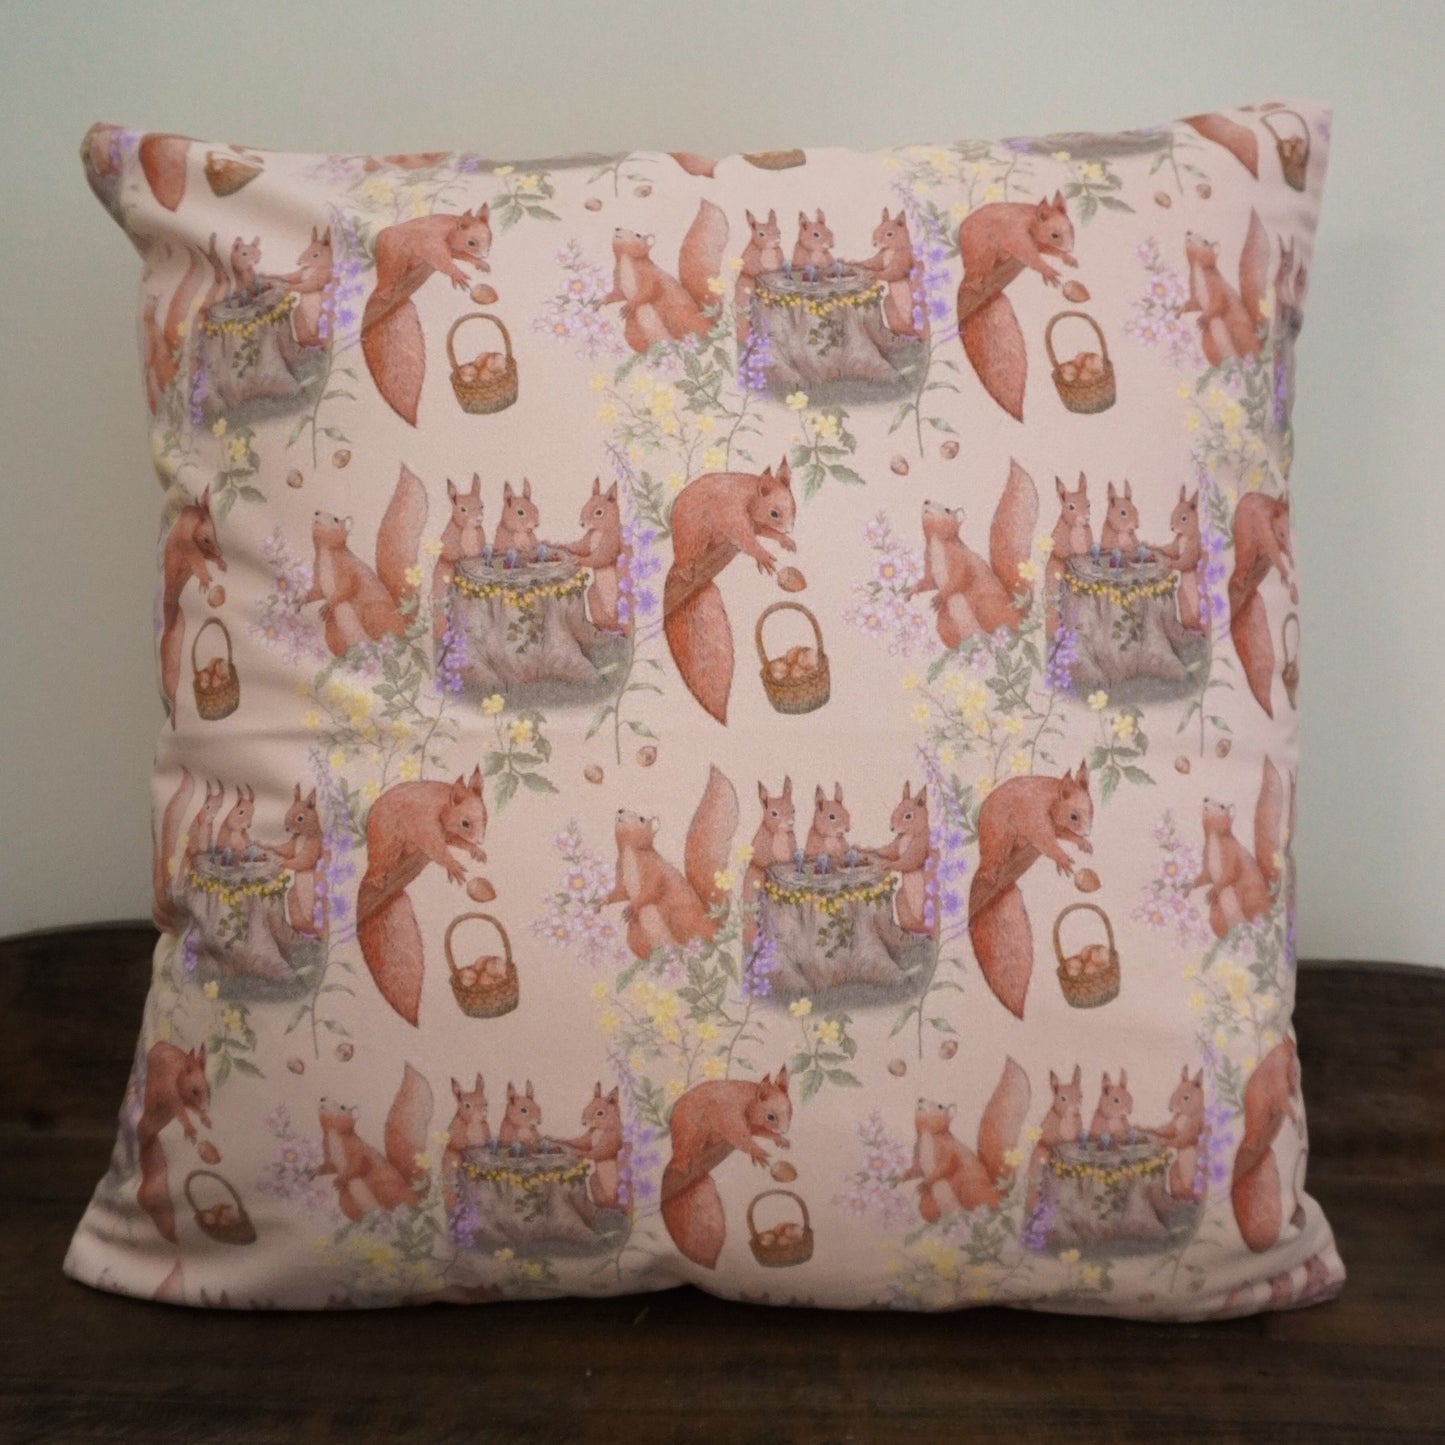 Willows Hedge Squirrels - Pillow Case